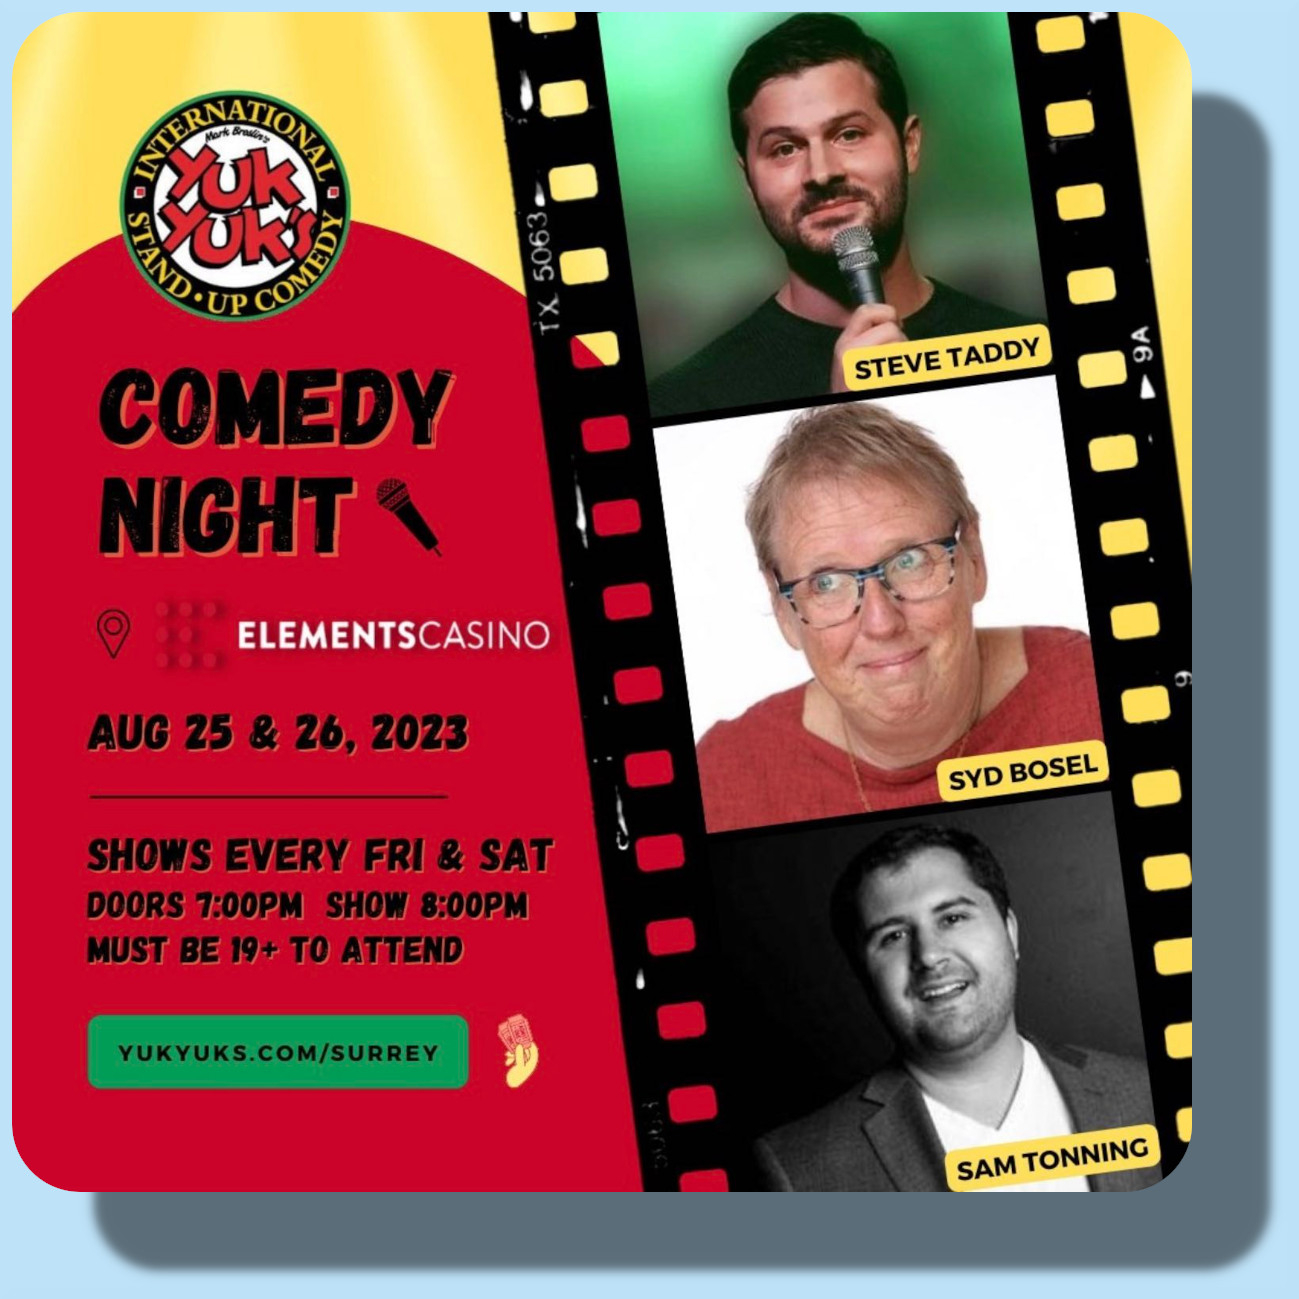 Upcoming Comedy Night at Elements Casino Surrey - August 25-26